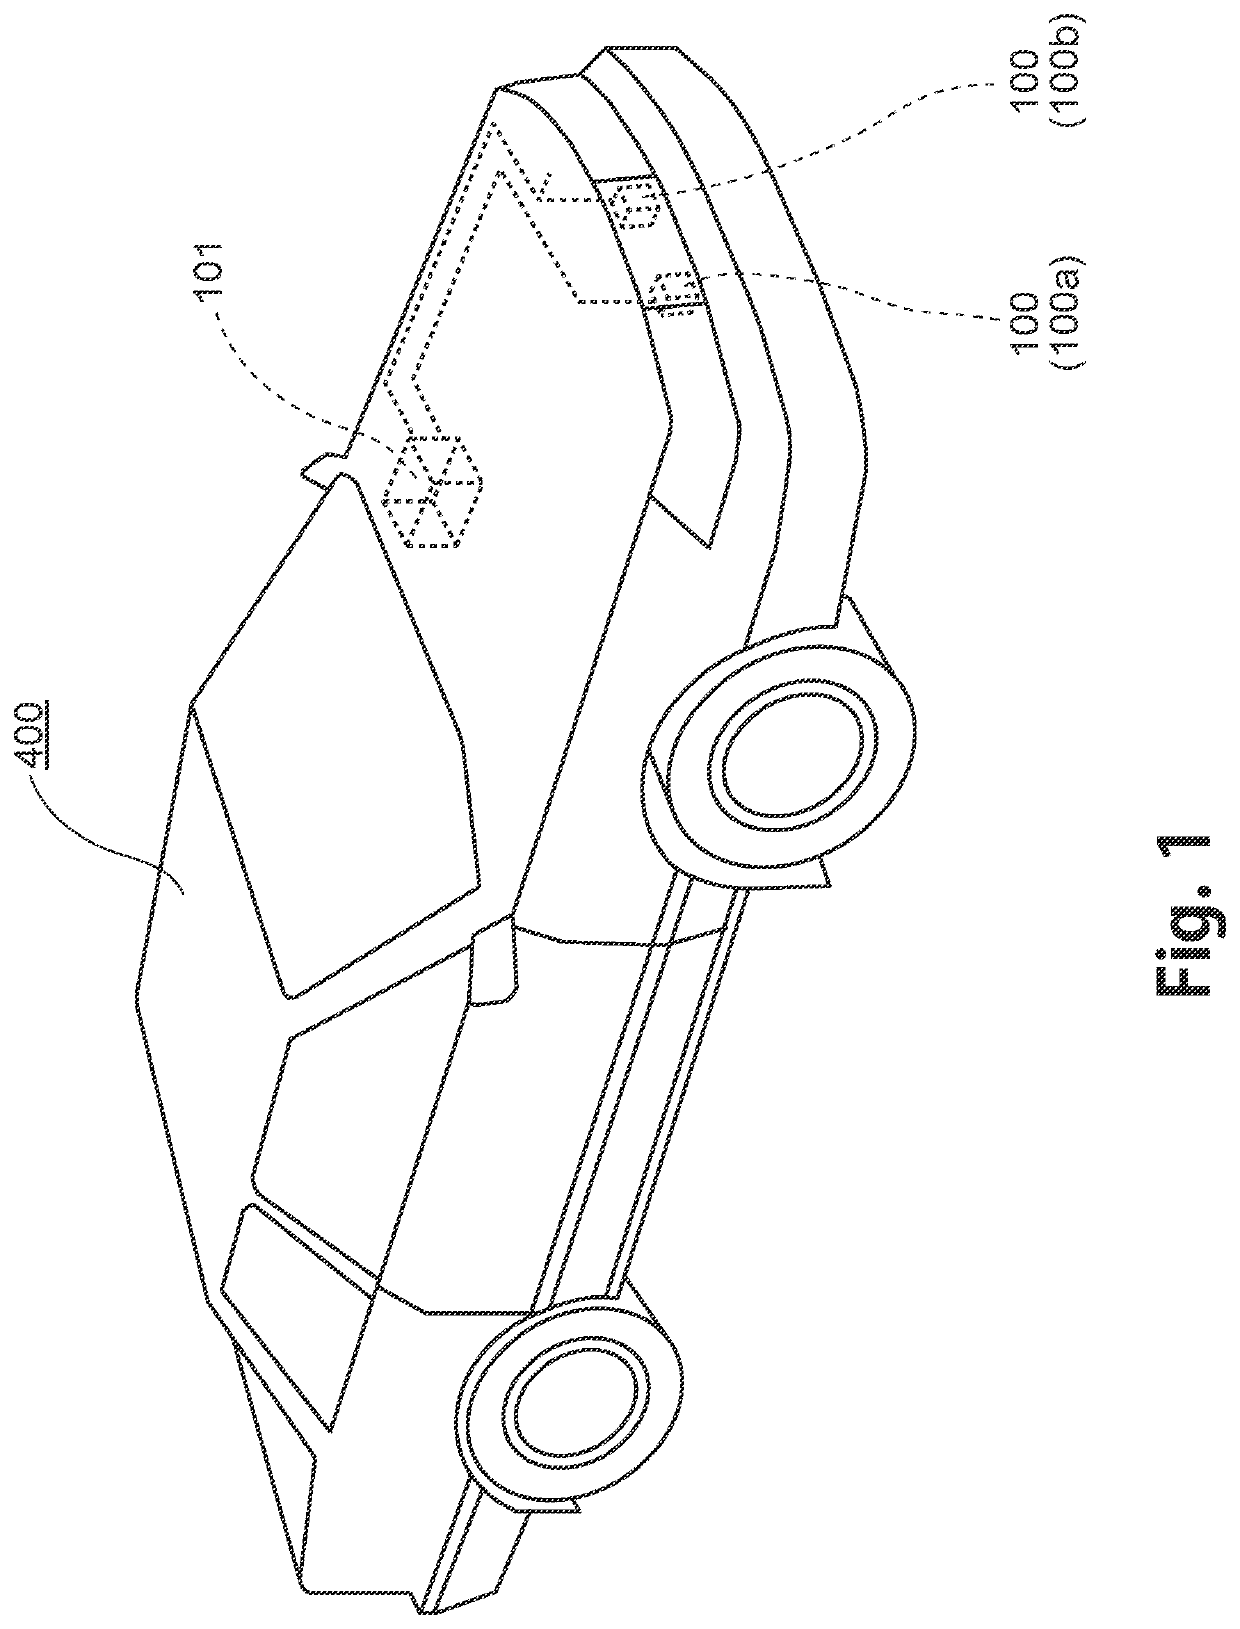 Semiconductor Laser and Laser Radar Device Having the Semiconductor Laser